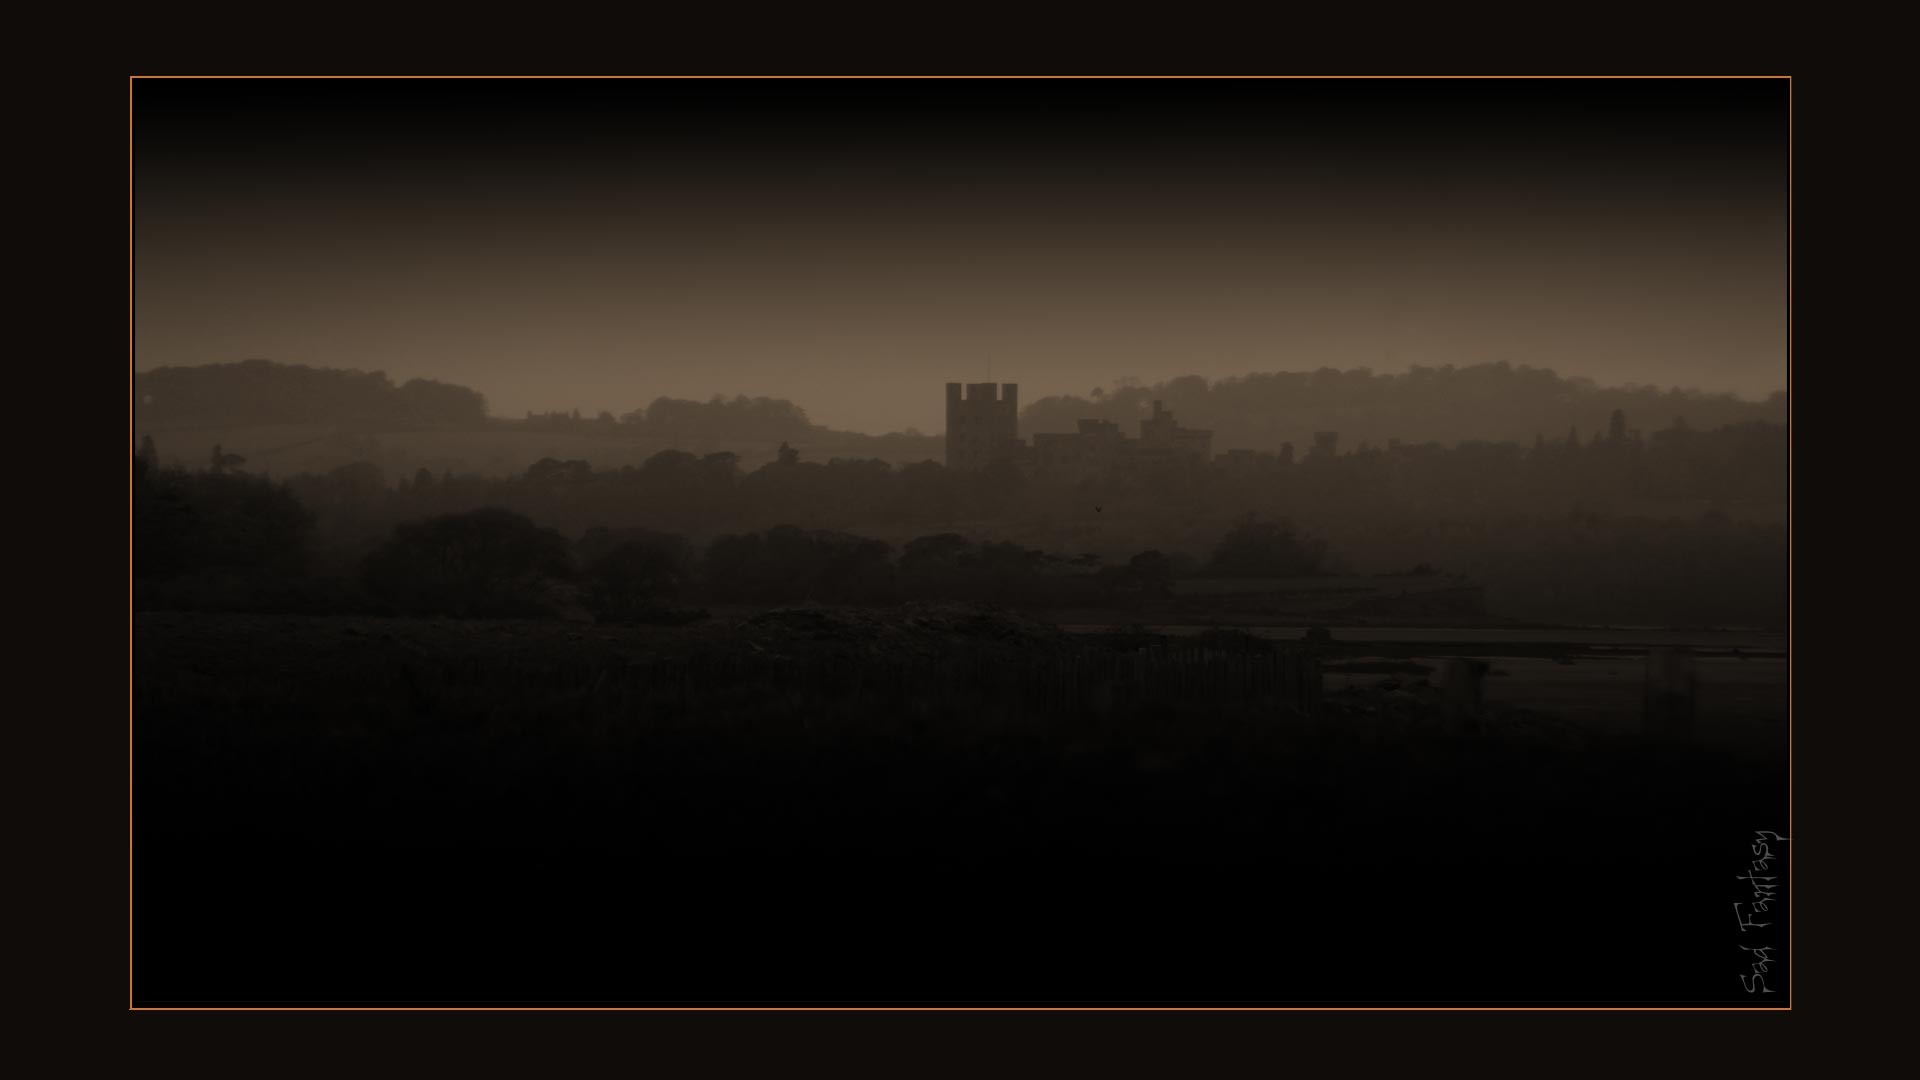 Castle in the landscape shrouded by mist by Sad Fantasy